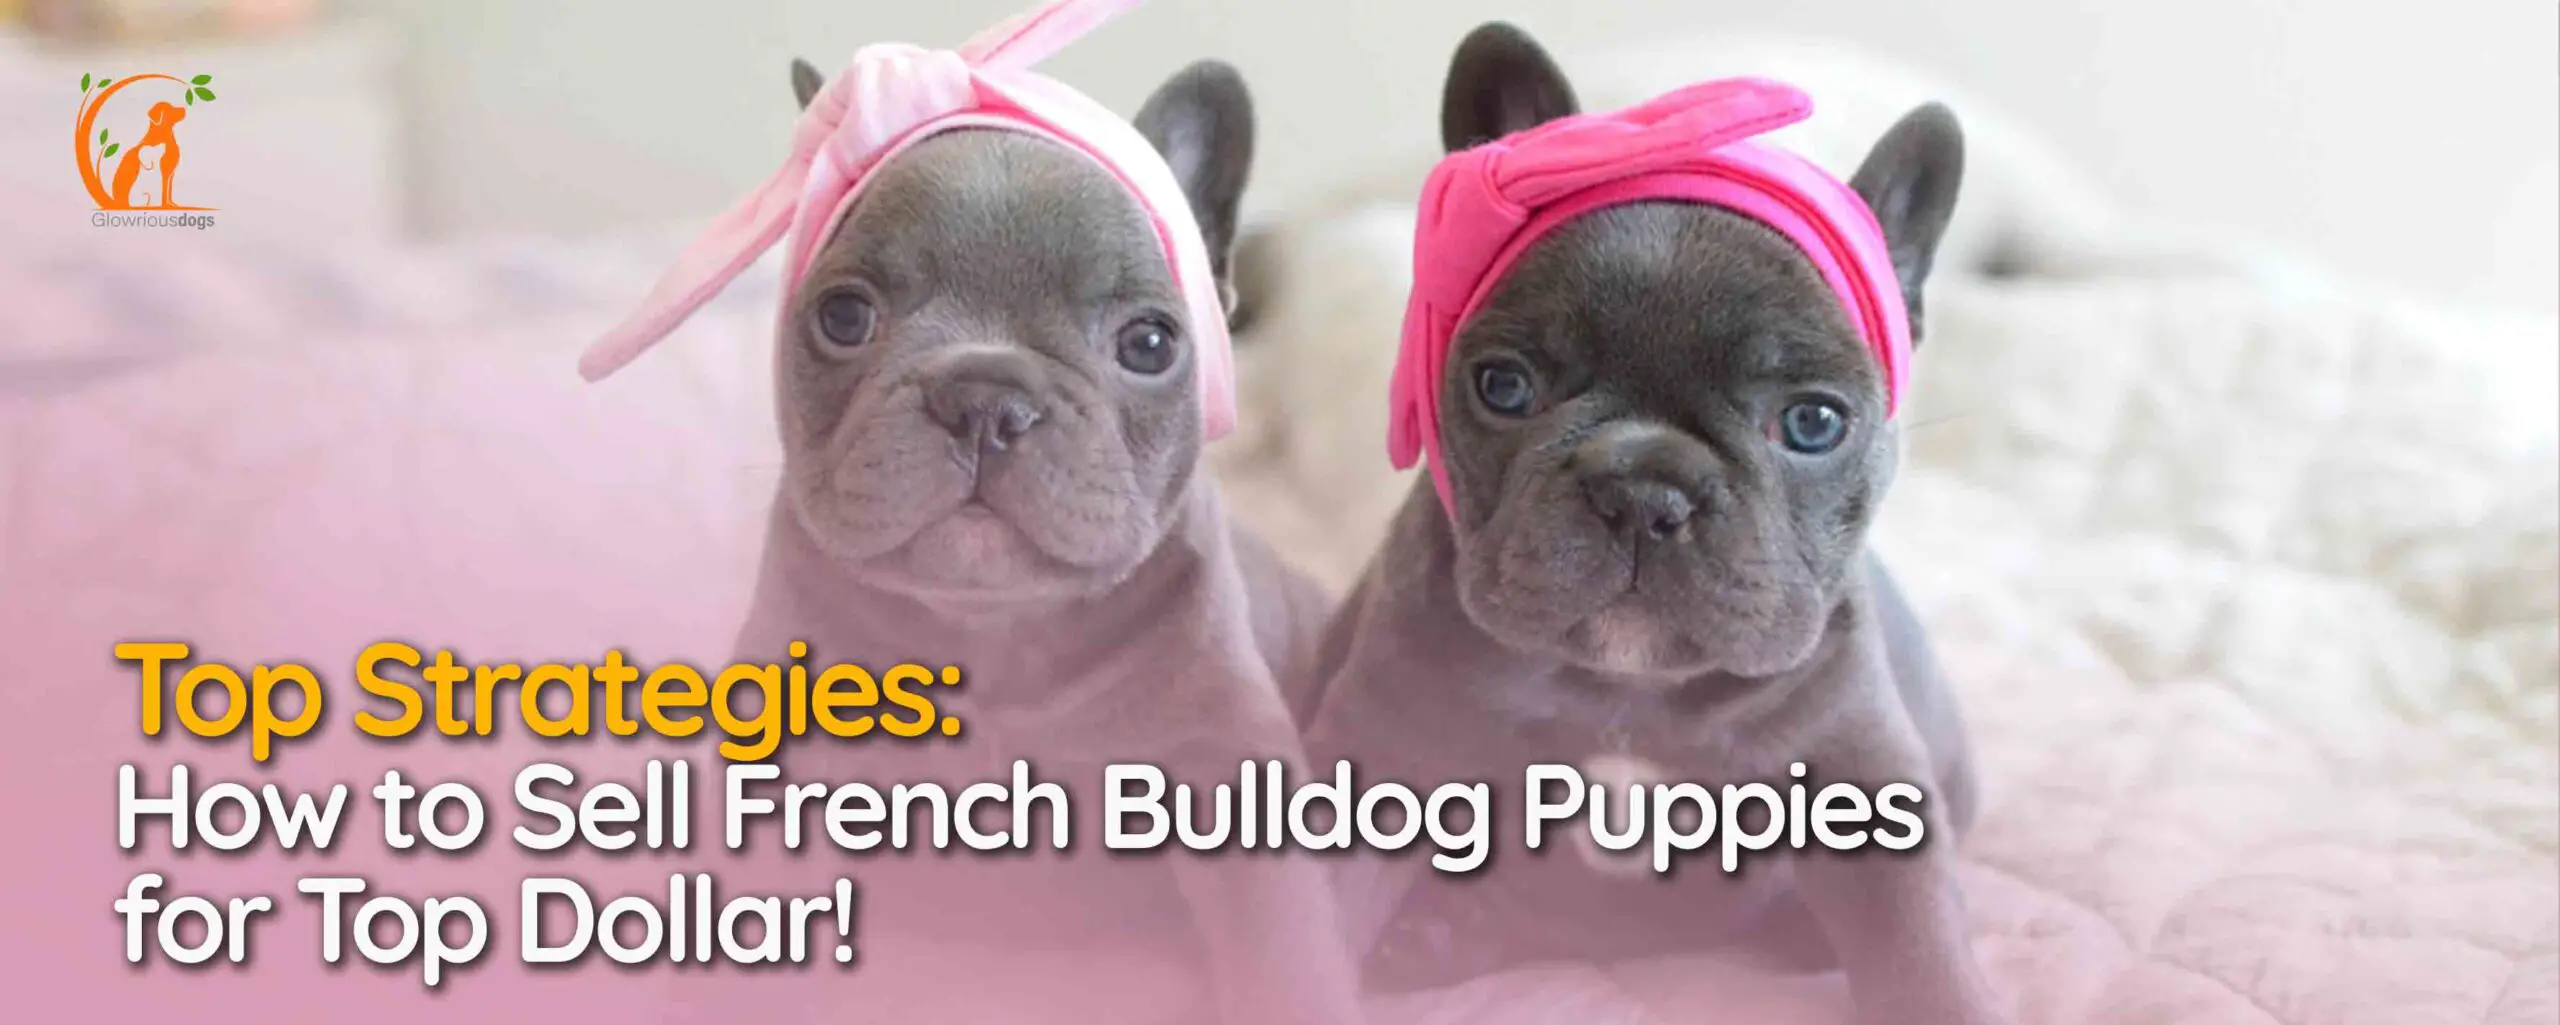 How to Sell French Bulldog Puppies